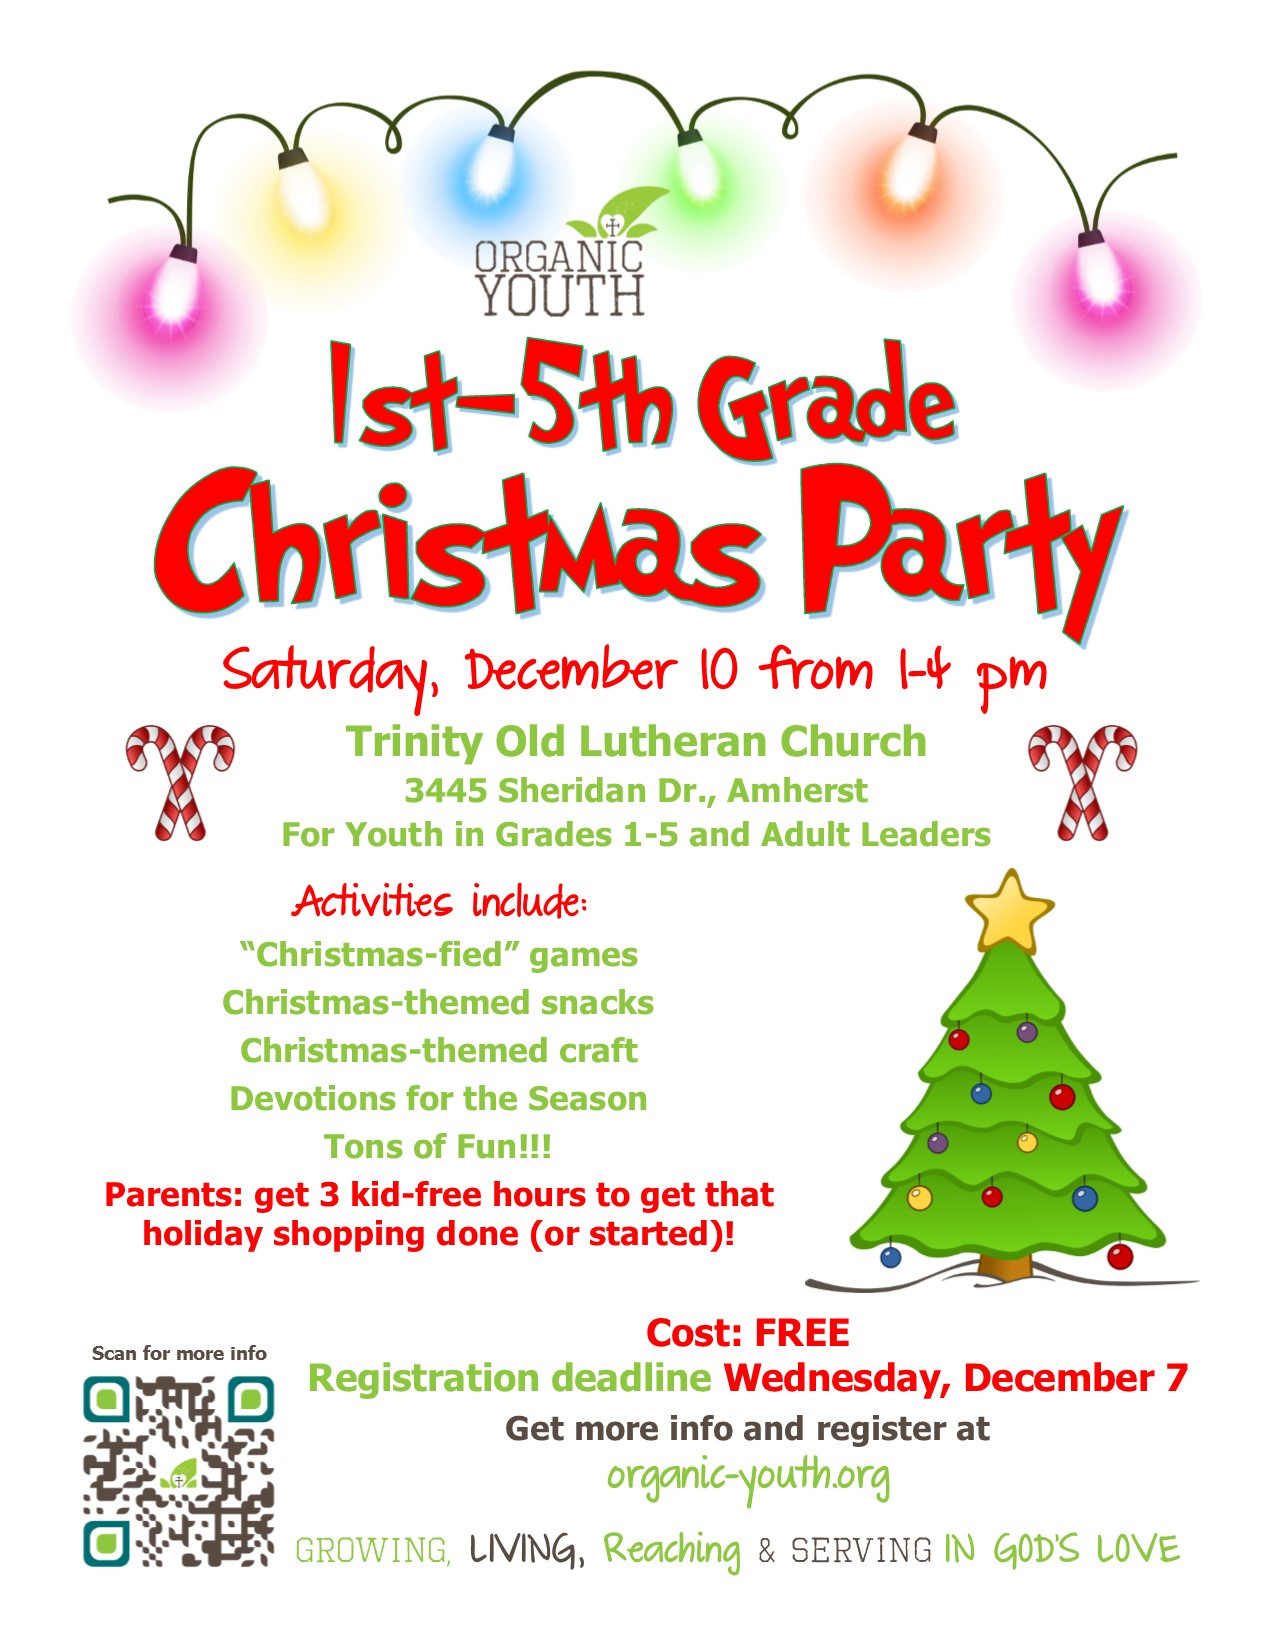 5Th Grade Christmas Party Ideas
 1st 5th Grade Christmas Party – Organic Youth